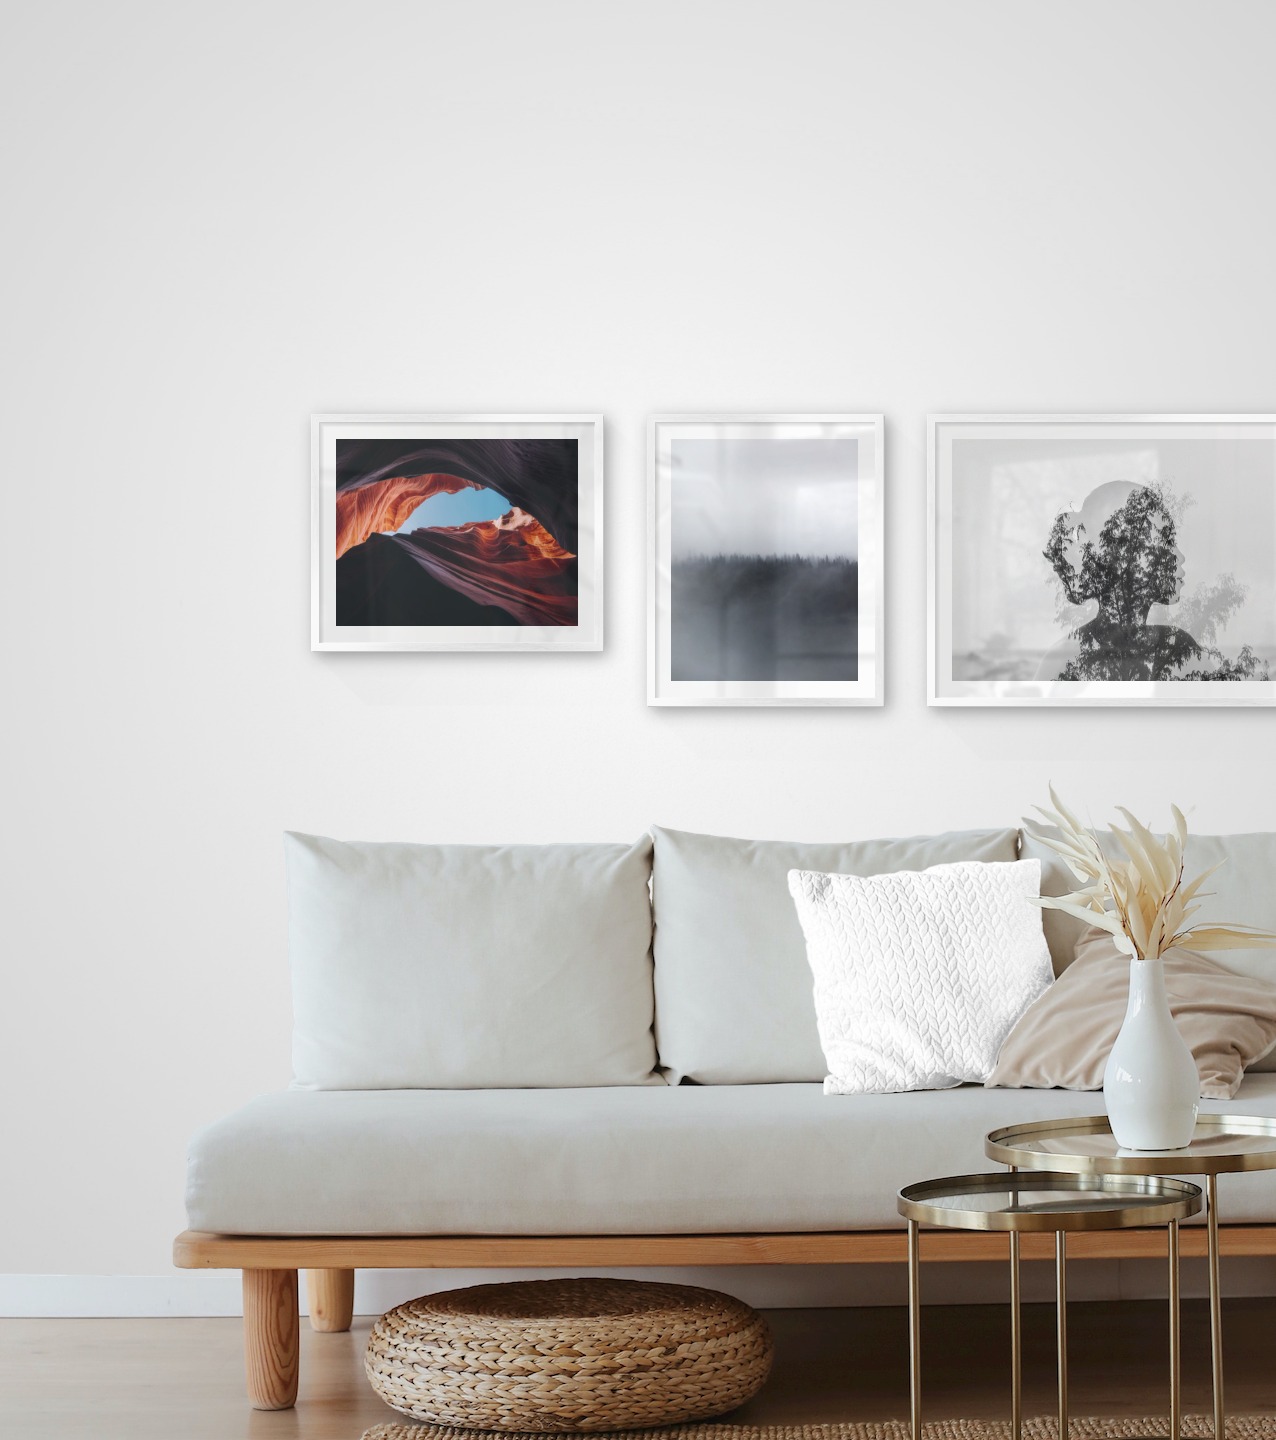 Gallery wall with picture frames in silver in sizes 40x50 and 50x70 with prints "Red rock formations", "Fog over treetops" and "Trees and silhouette"